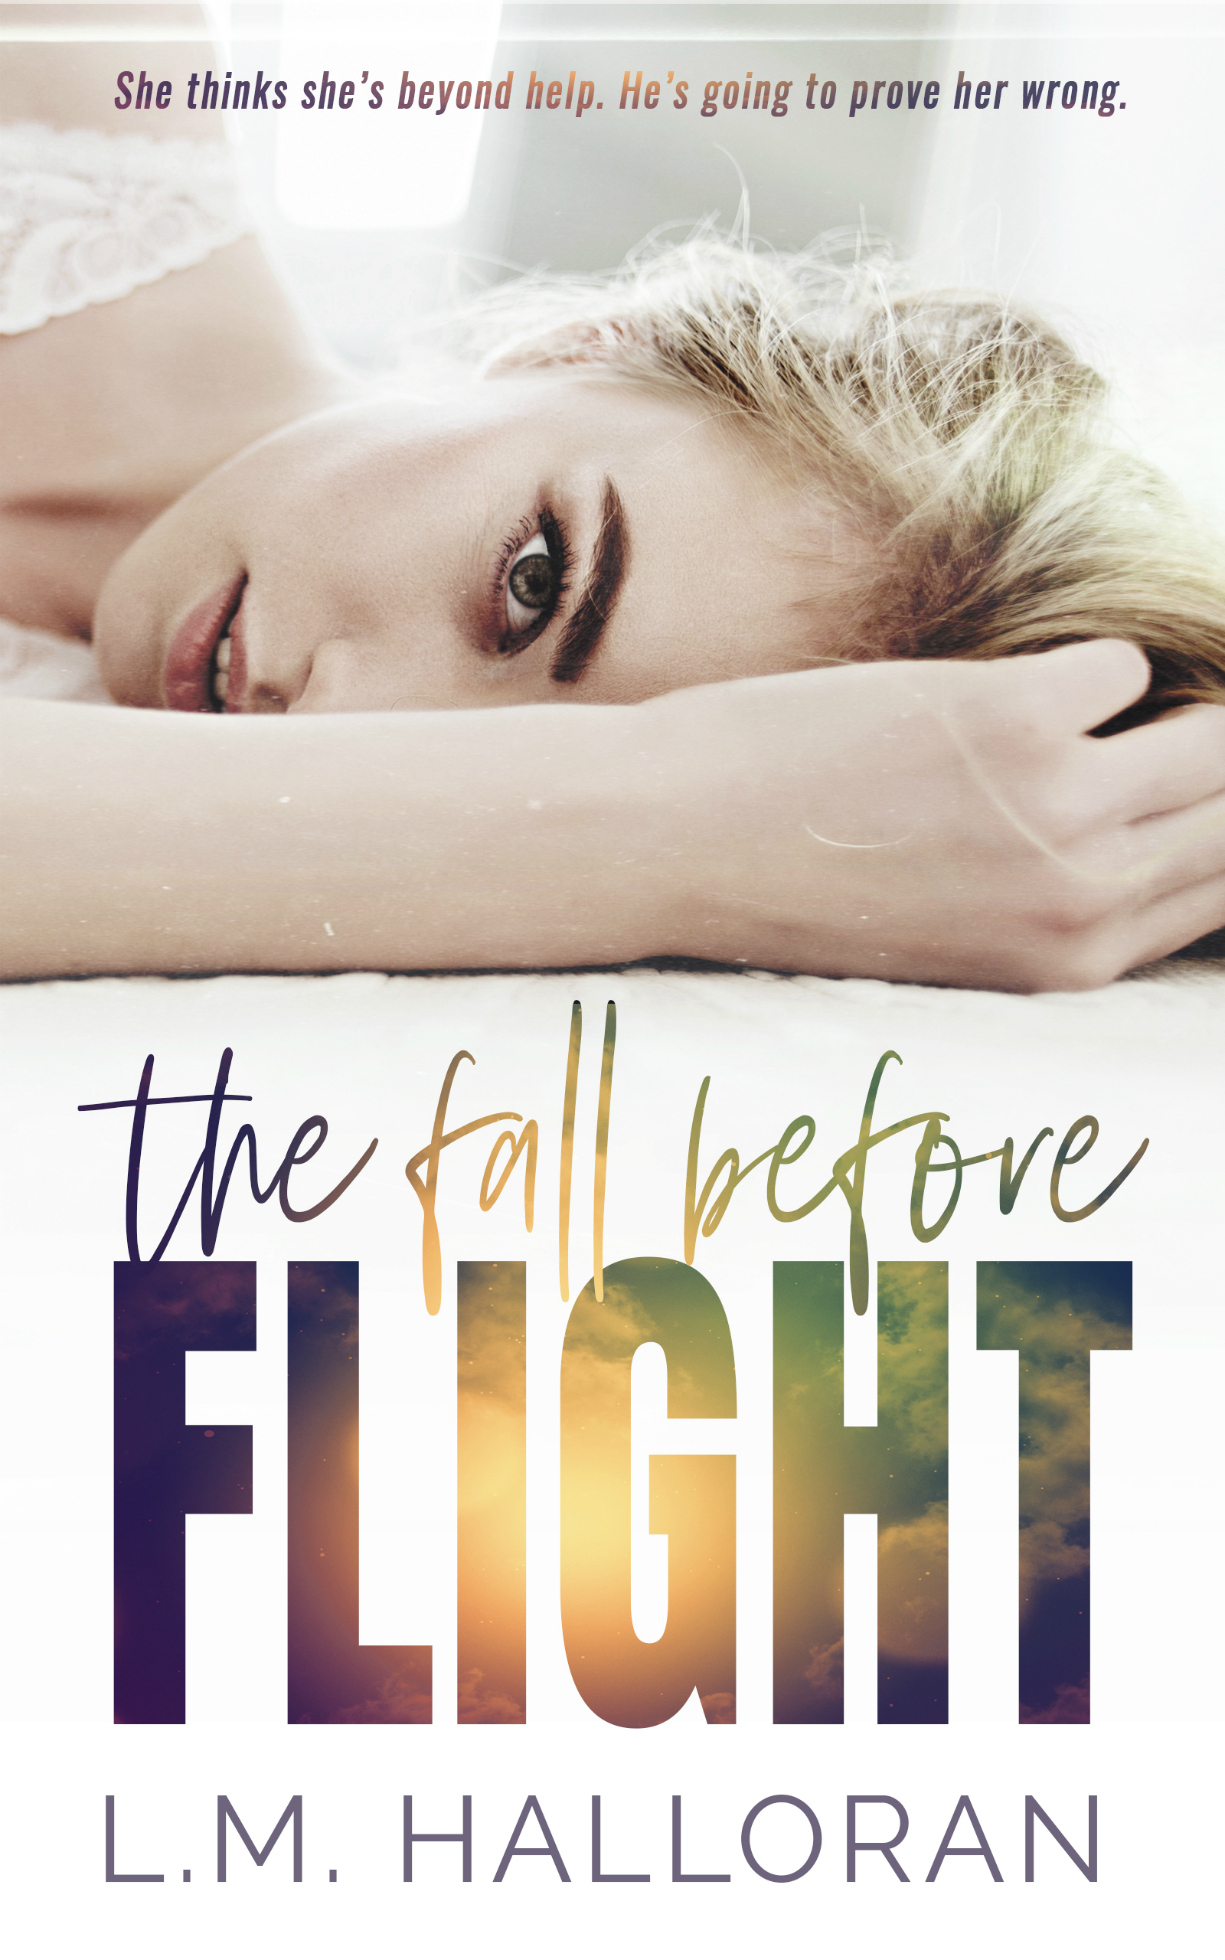 The Fall Before Flight by L.M. Halloran [Review]